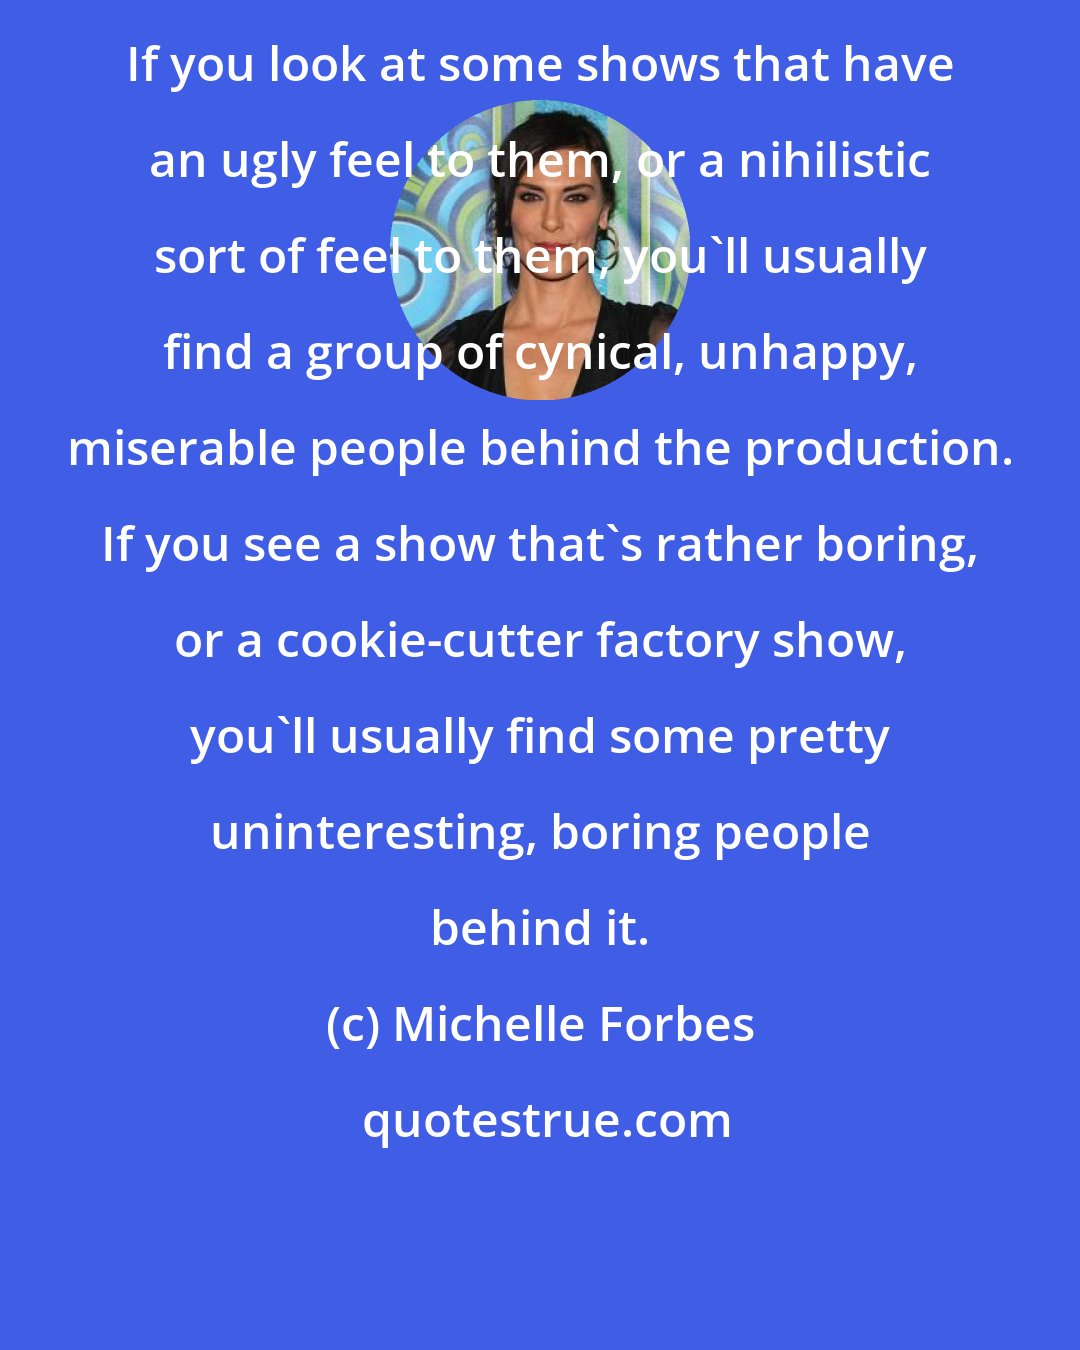 Michelle Forbes: If you look at some shows that have an ugly feel to them, or a nihilistic sort of feel to them, you'll usually find a group of cynical, unhappy, miserable people behind the production. If you see a show that's rather boring, or a cookie-cutter factory show, you'll usually find some pretty uninteresting, boring people behind it.